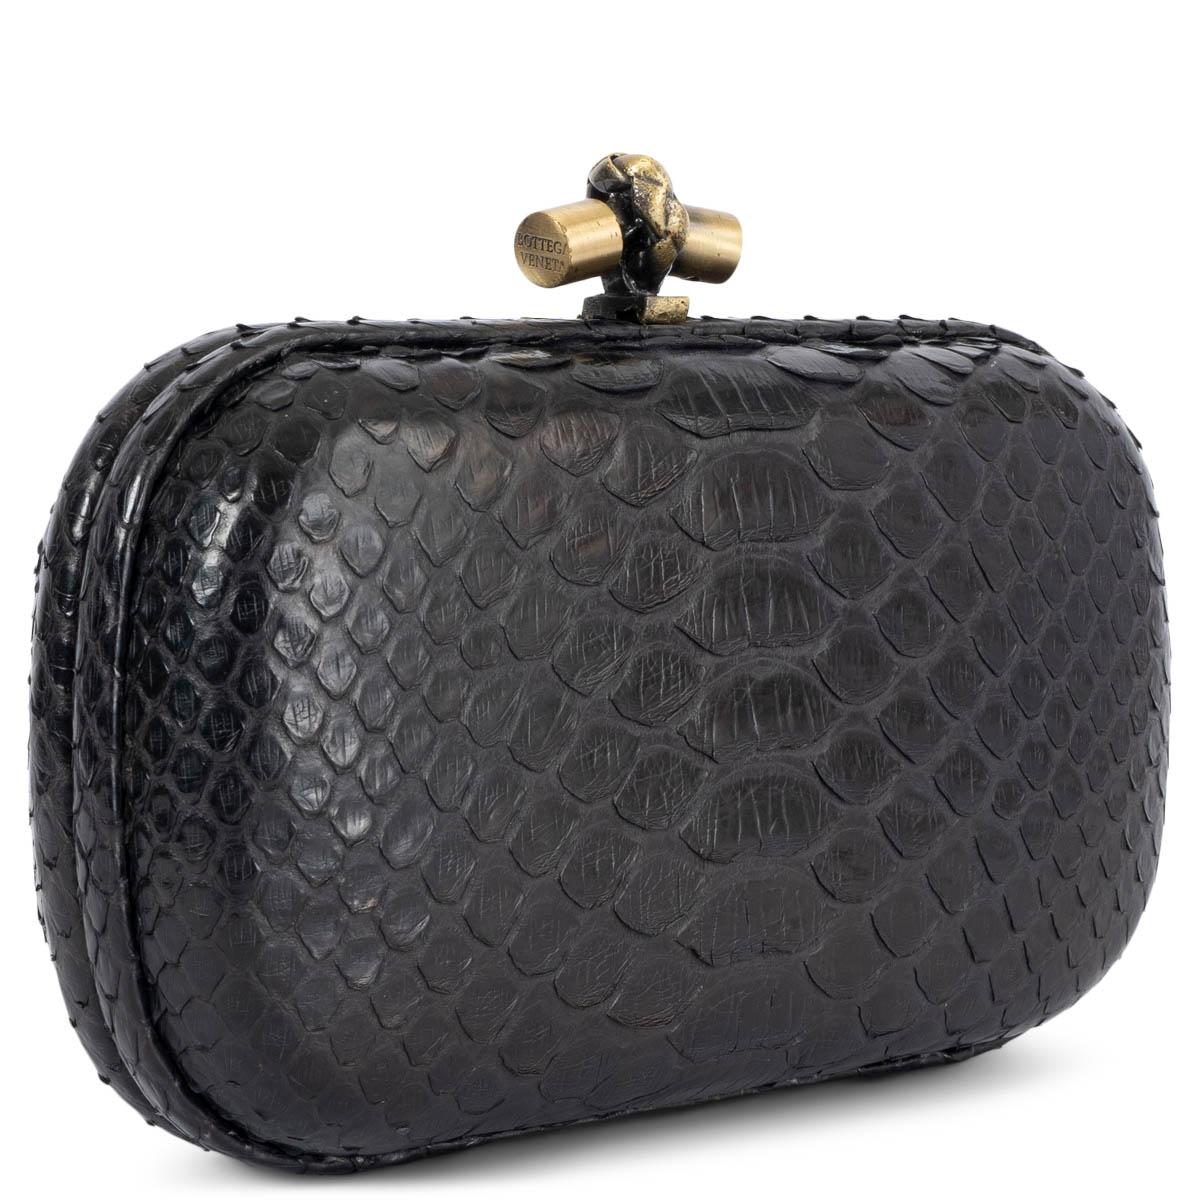 100% authentic Bottega Veneta Knot clutch in black python with grey suede lining and antique gold-tone knot closure. Has been carried and shows some yellow marks on the lining and a soft smoke odor. Overall in very good condition.